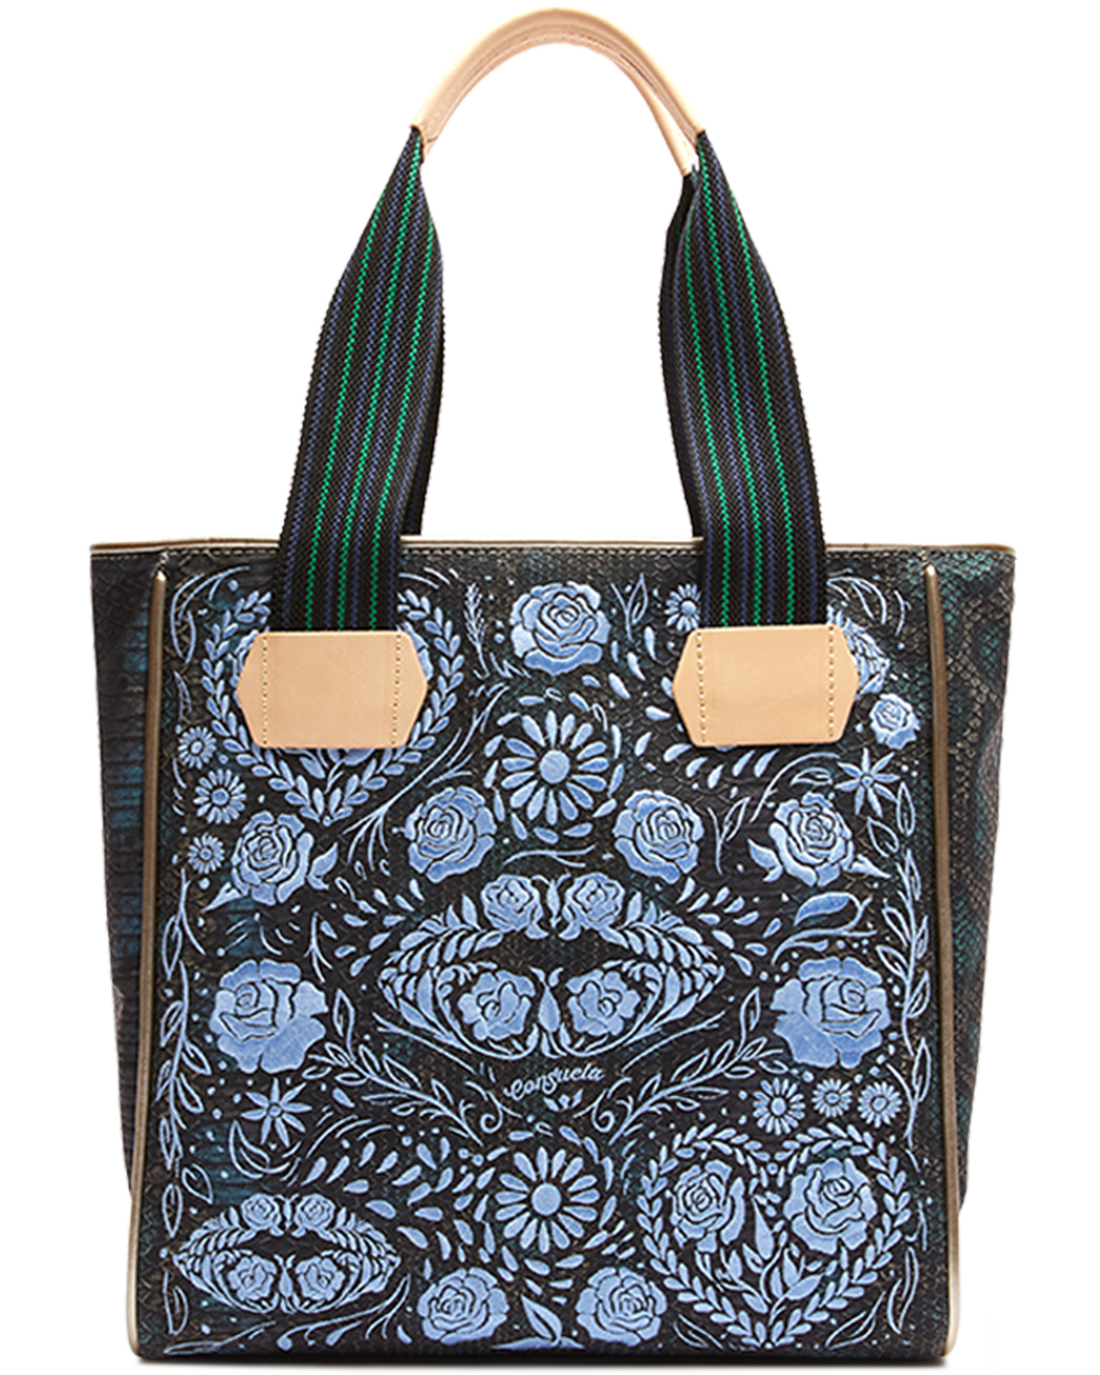 BESOS CLASSIC TOTE – The Haskell Drug Store